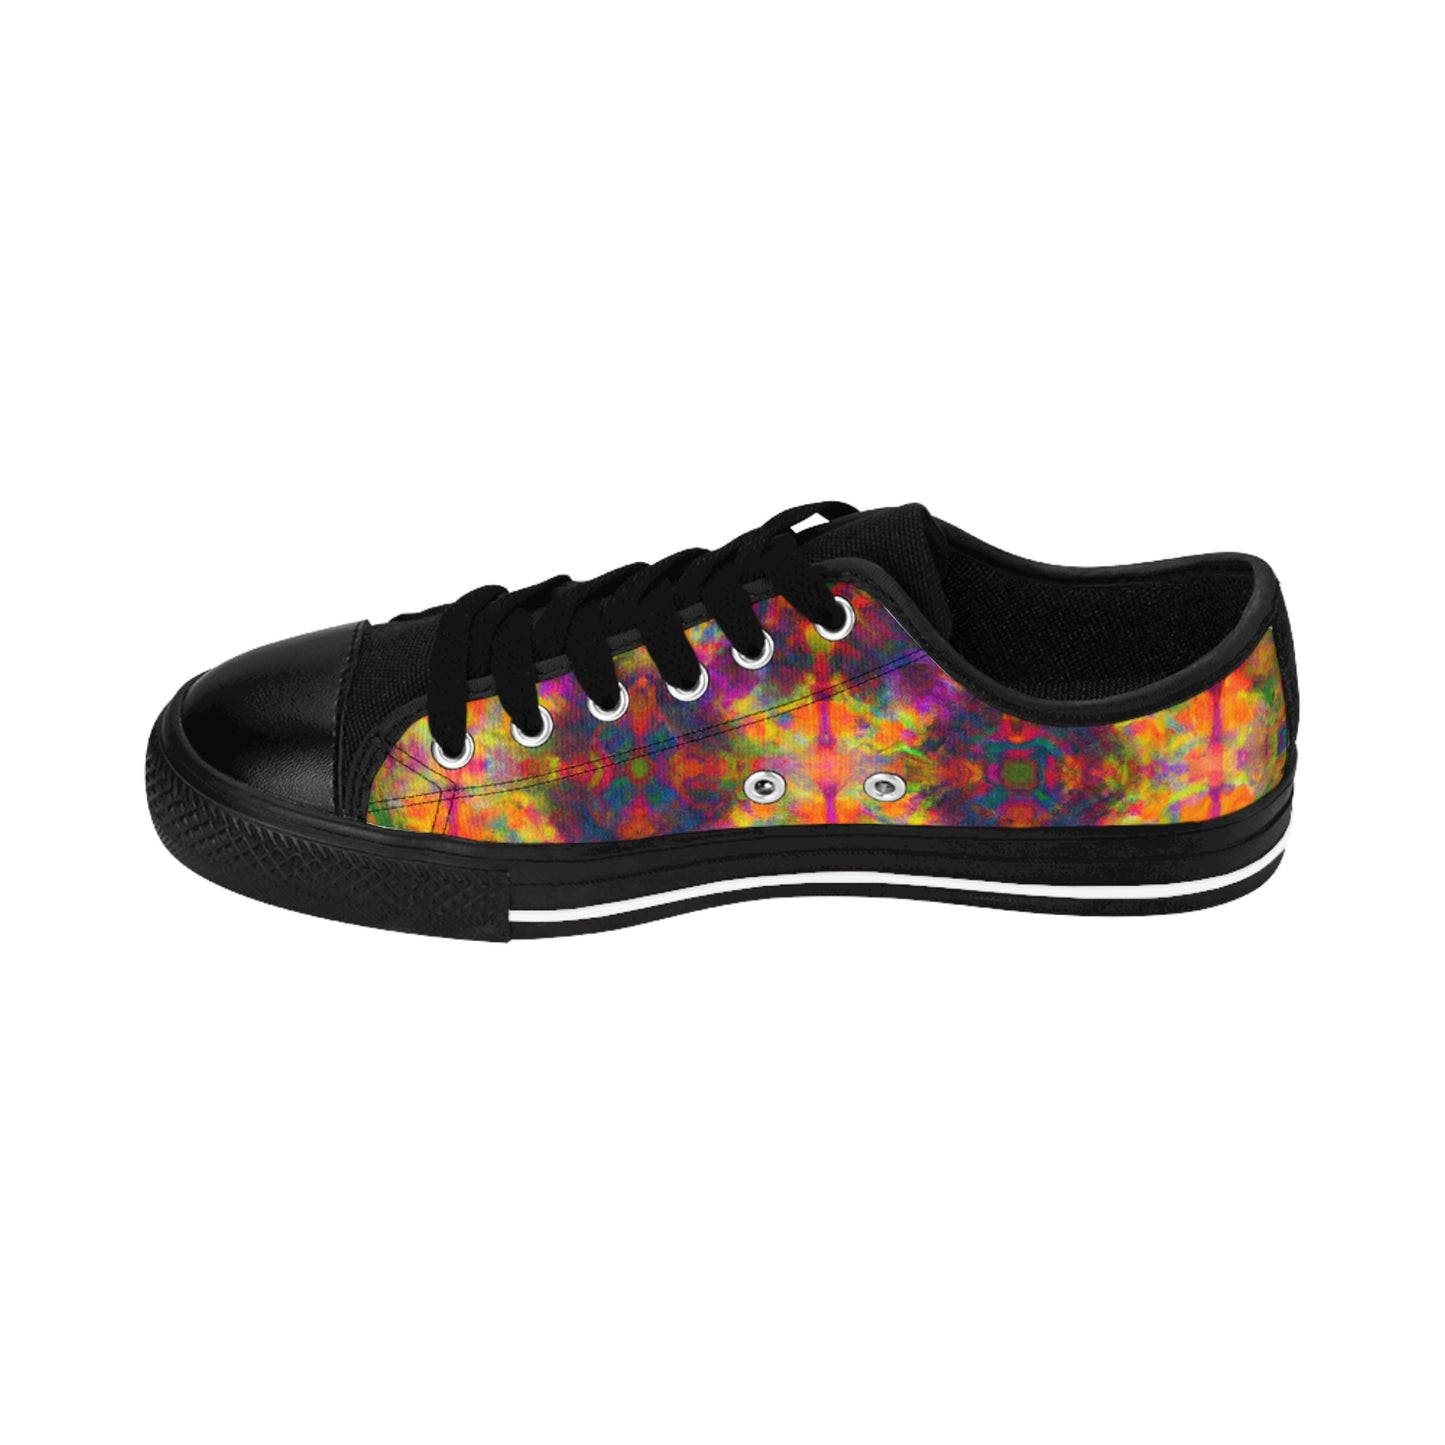 Dameon Lionblood - Psychedelic Low Top